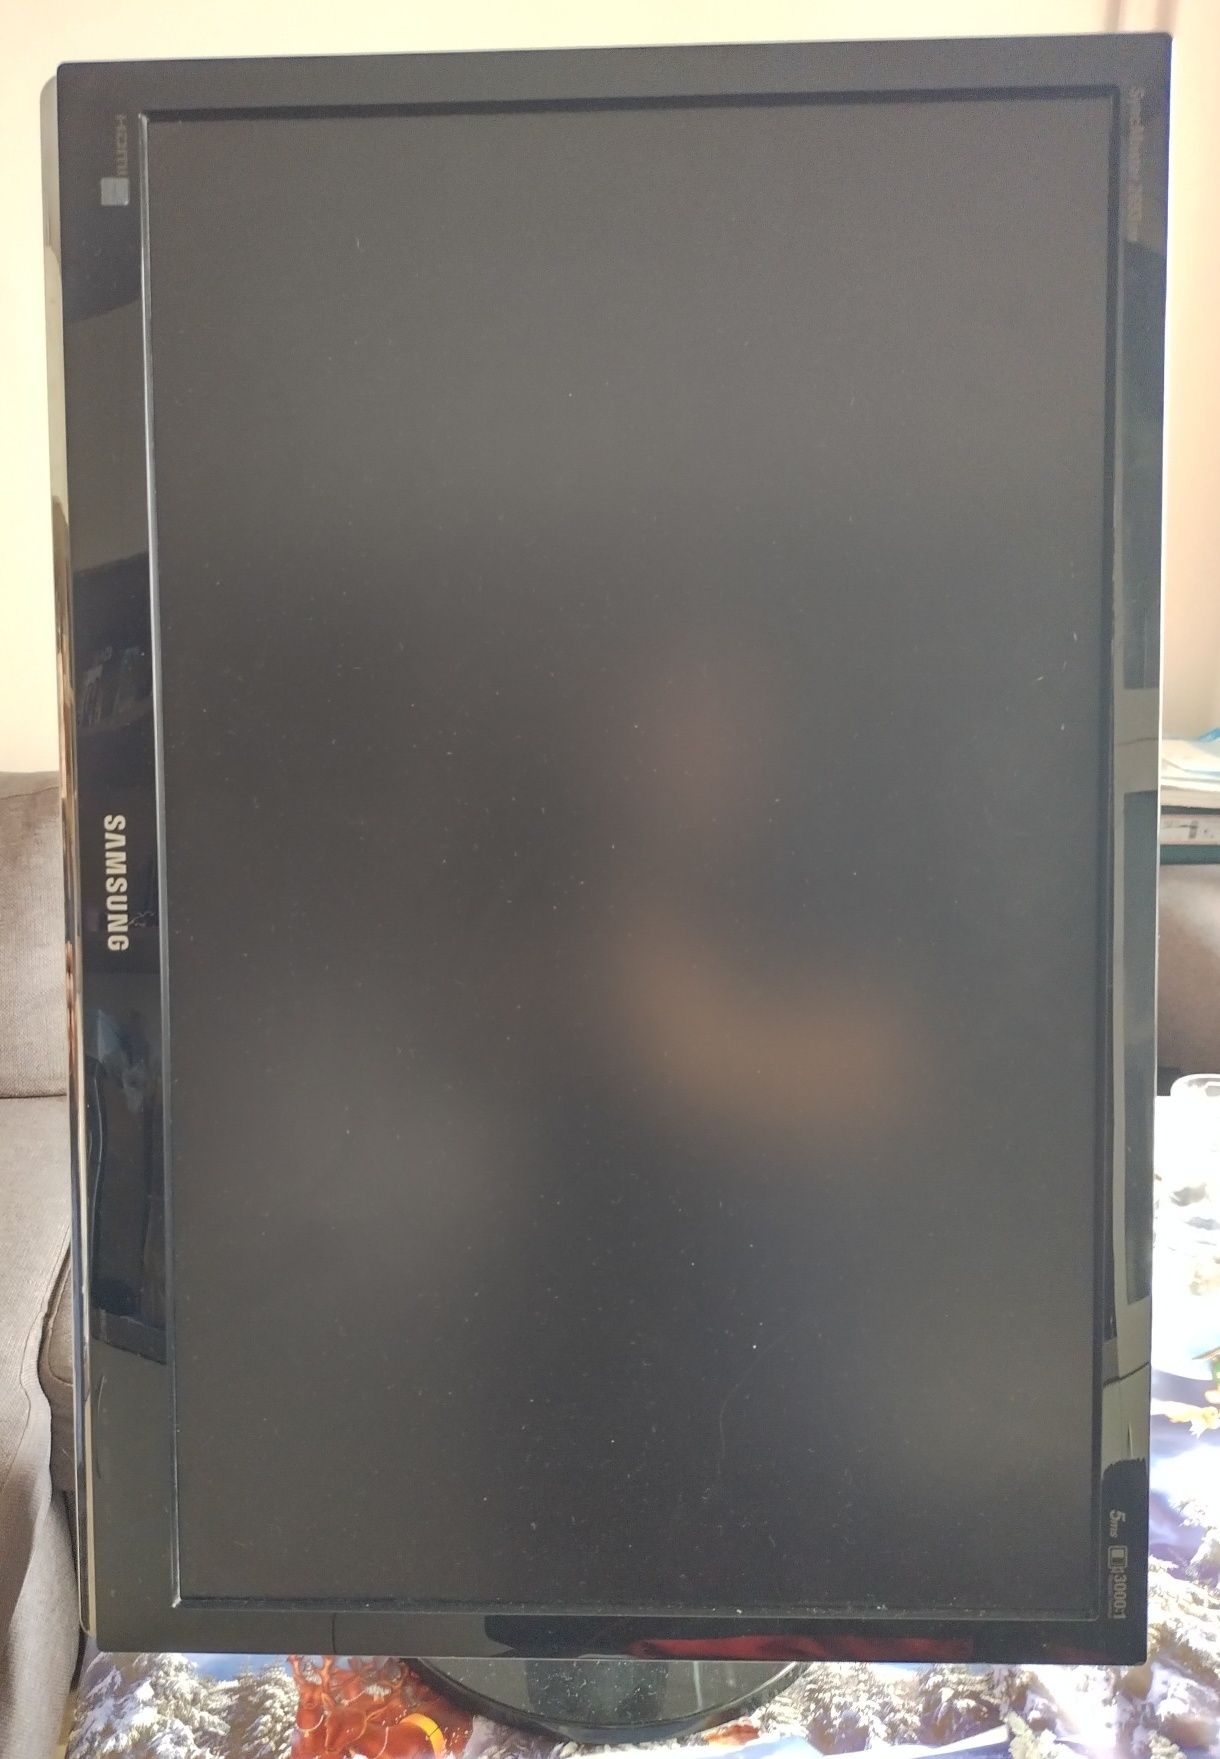 Samsung SyncMaster 2693HM 25.5" Widescreen LCD Computer Display